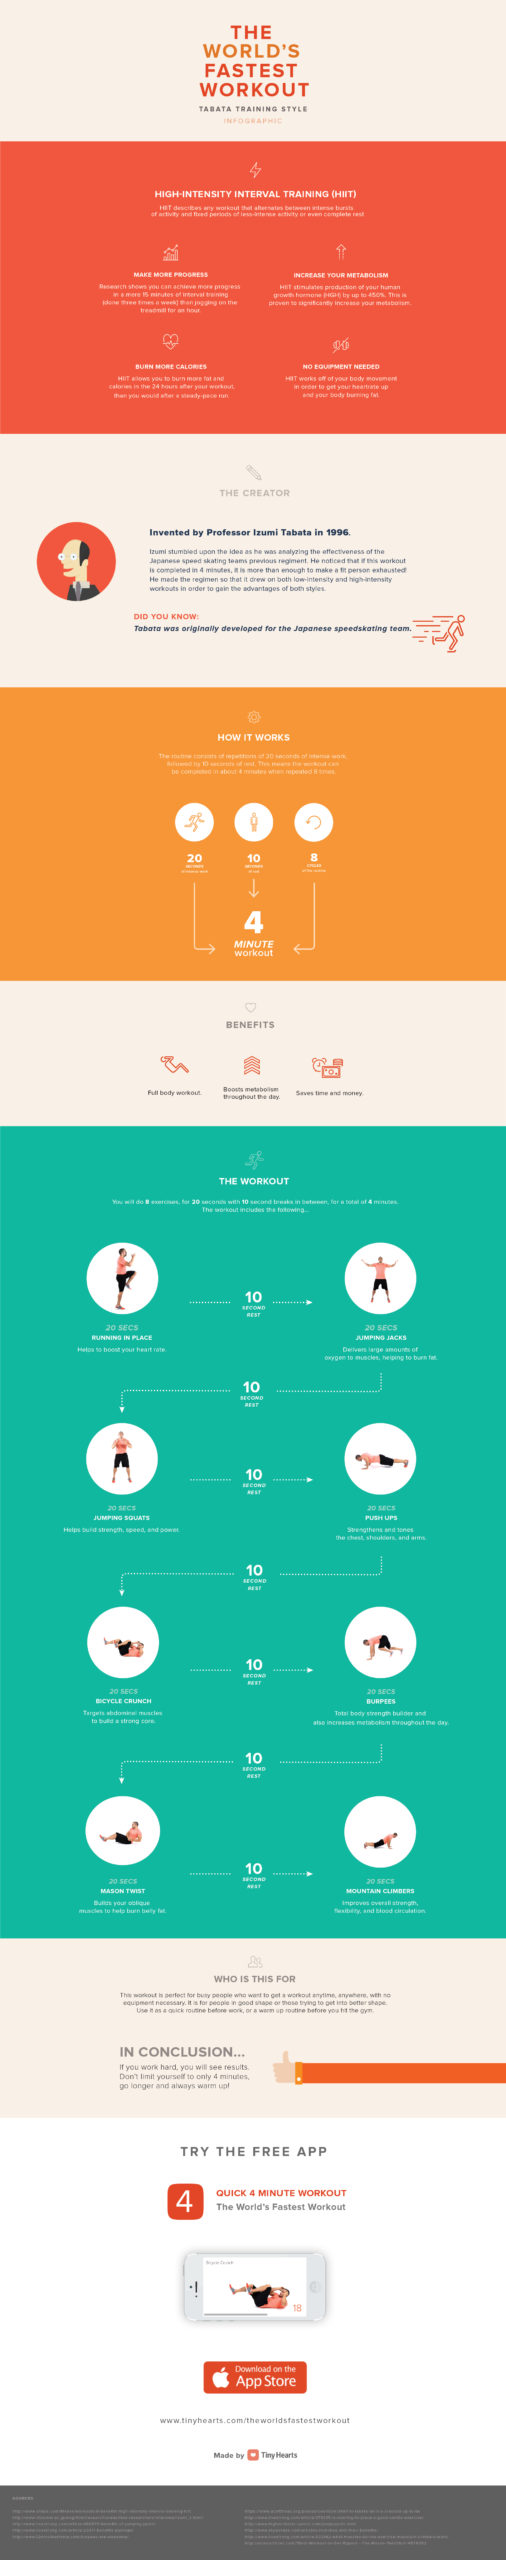 This Graphic Walks You Through The Four-Minute Workout